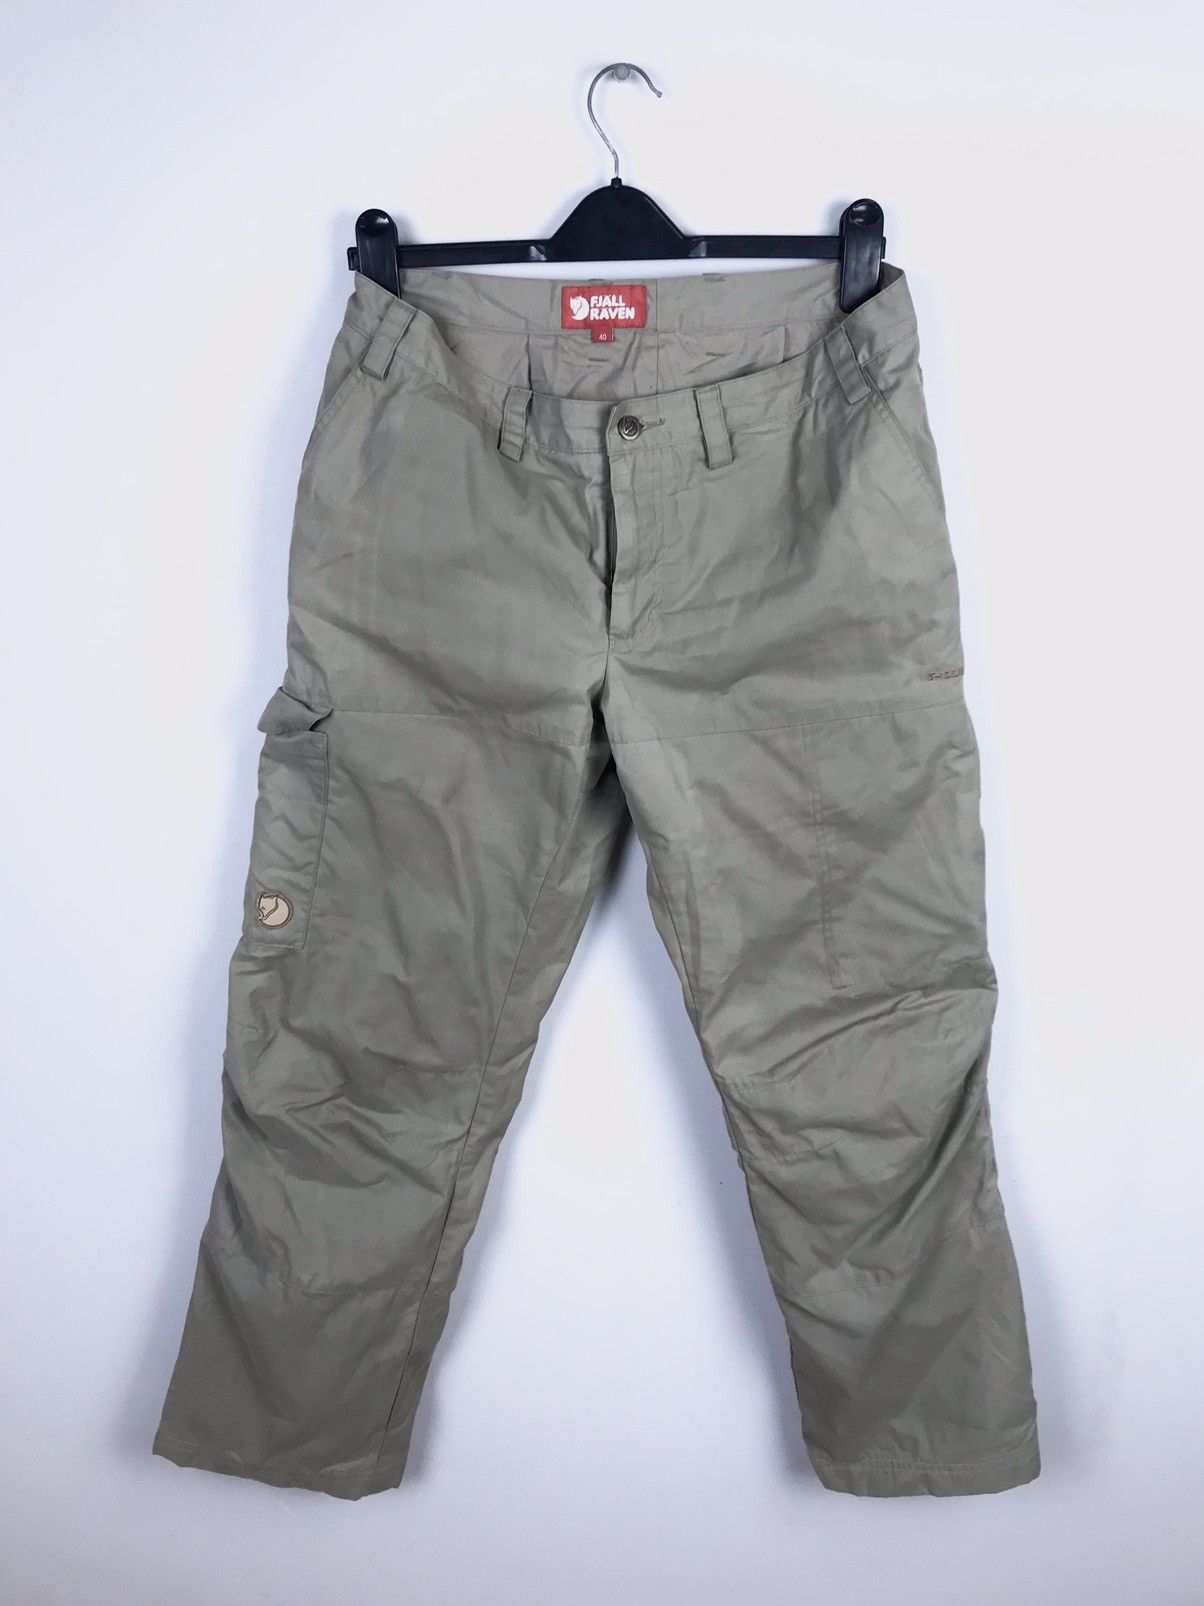 The North Face Hyvent pants gorpcore pants Size Womens S